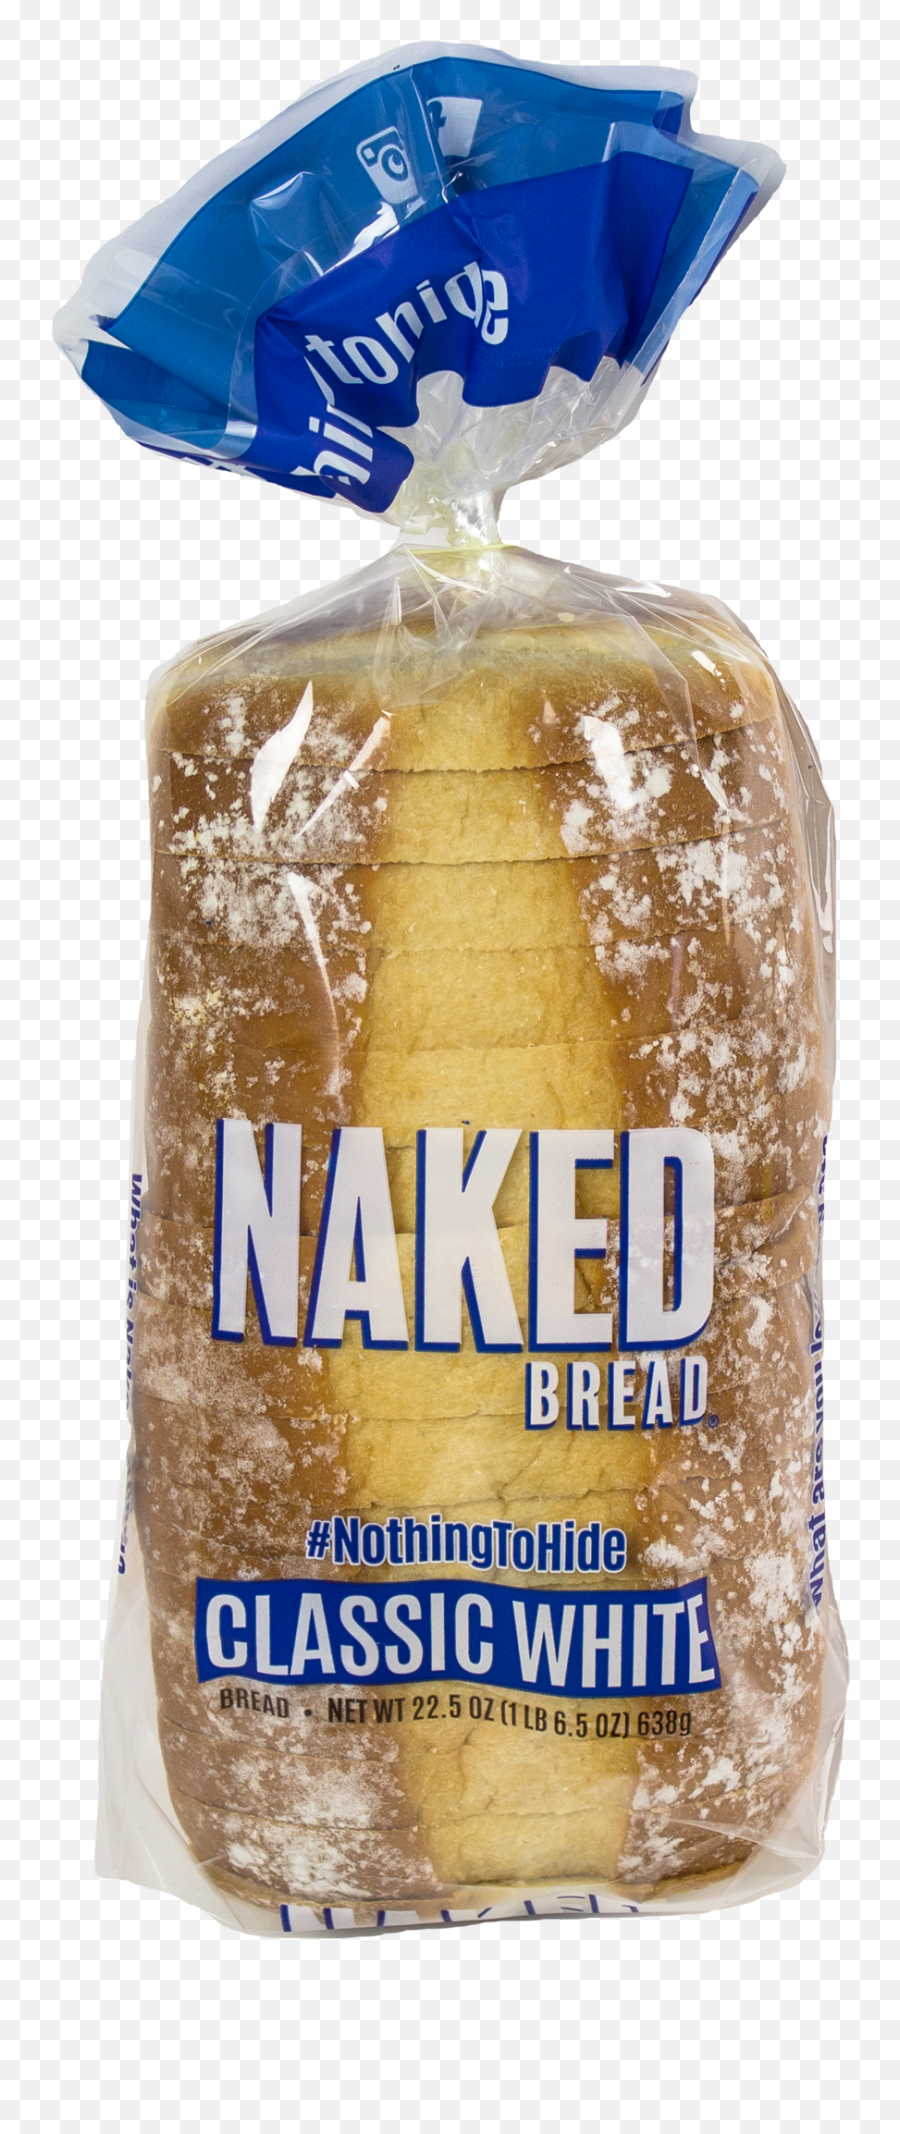 Naked Classic White - Walmartcom Whole Wheat Bread Png,White Bread Png